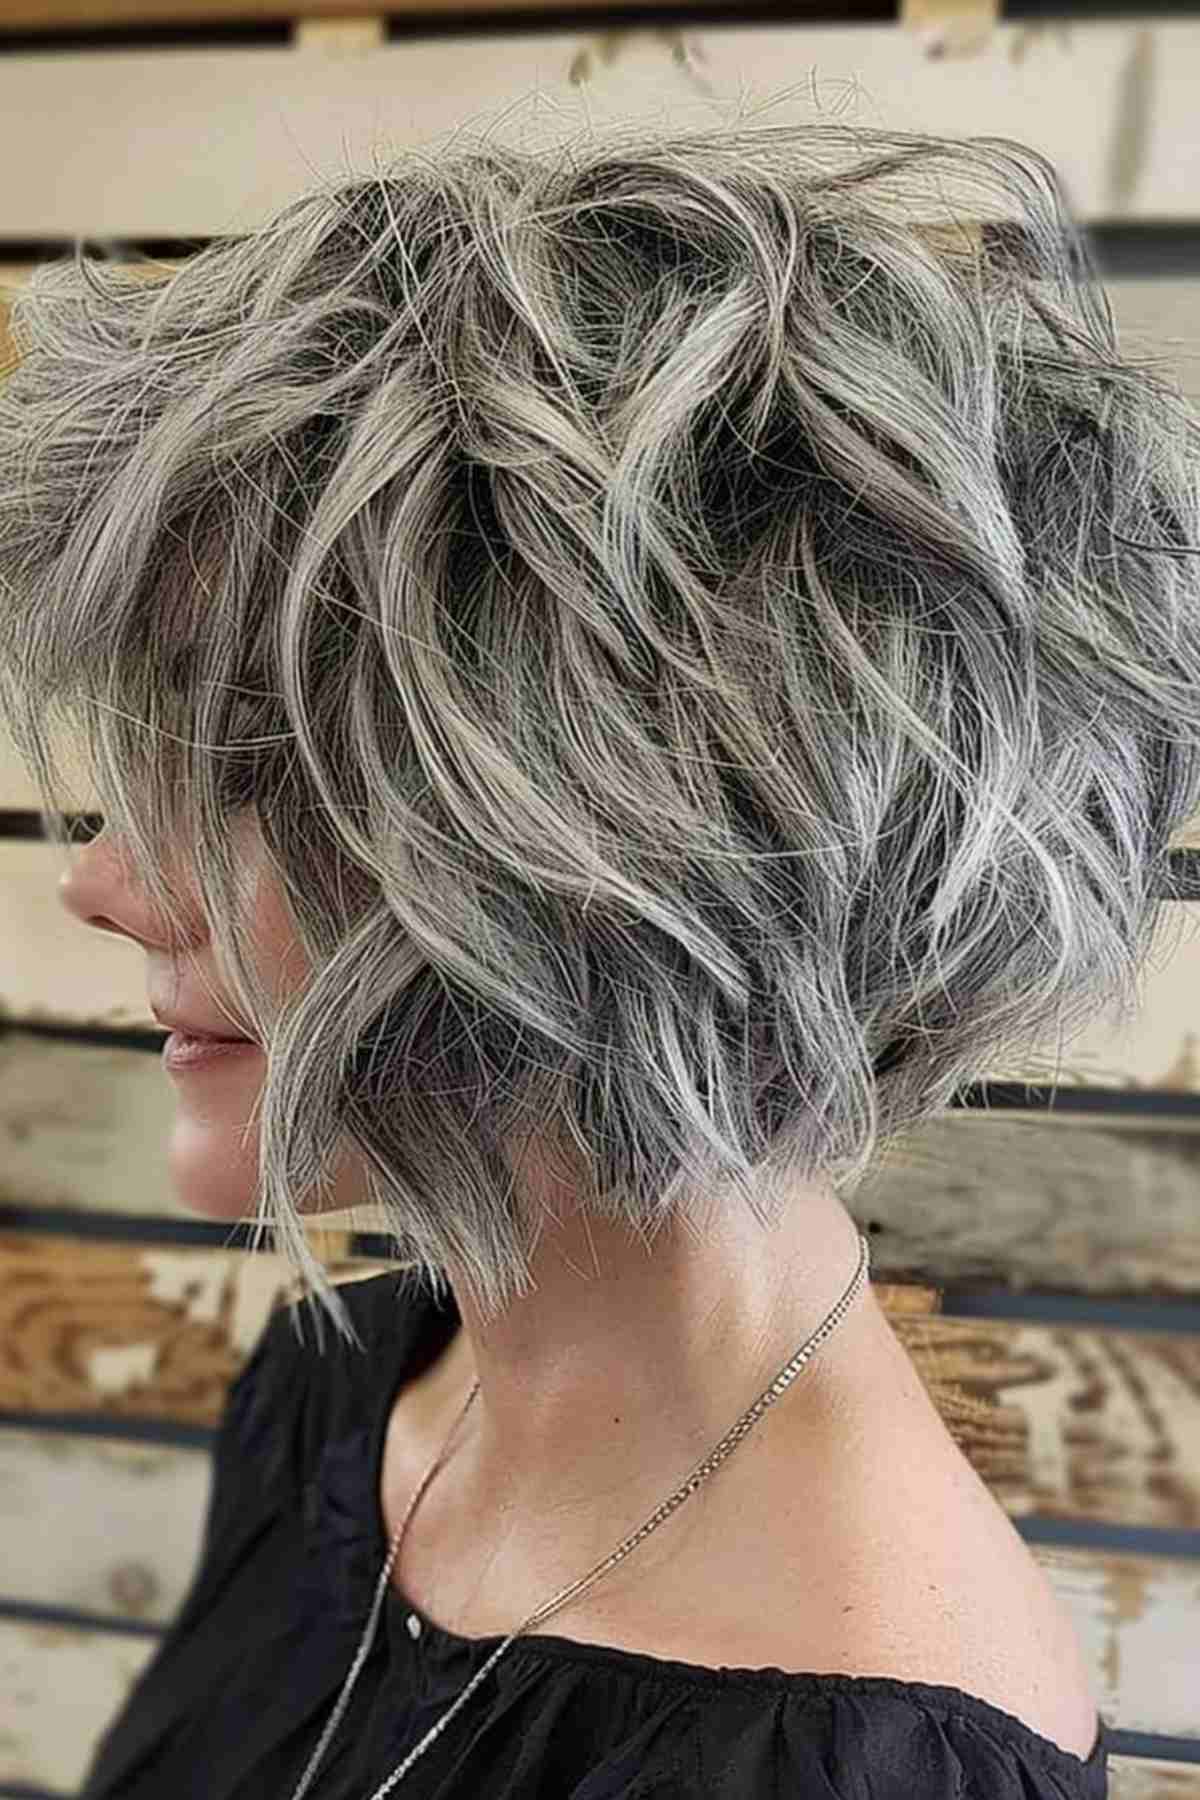 Textured tousled ash gray bob hairstyle for mature women showcasing modern styling and natural gray blending